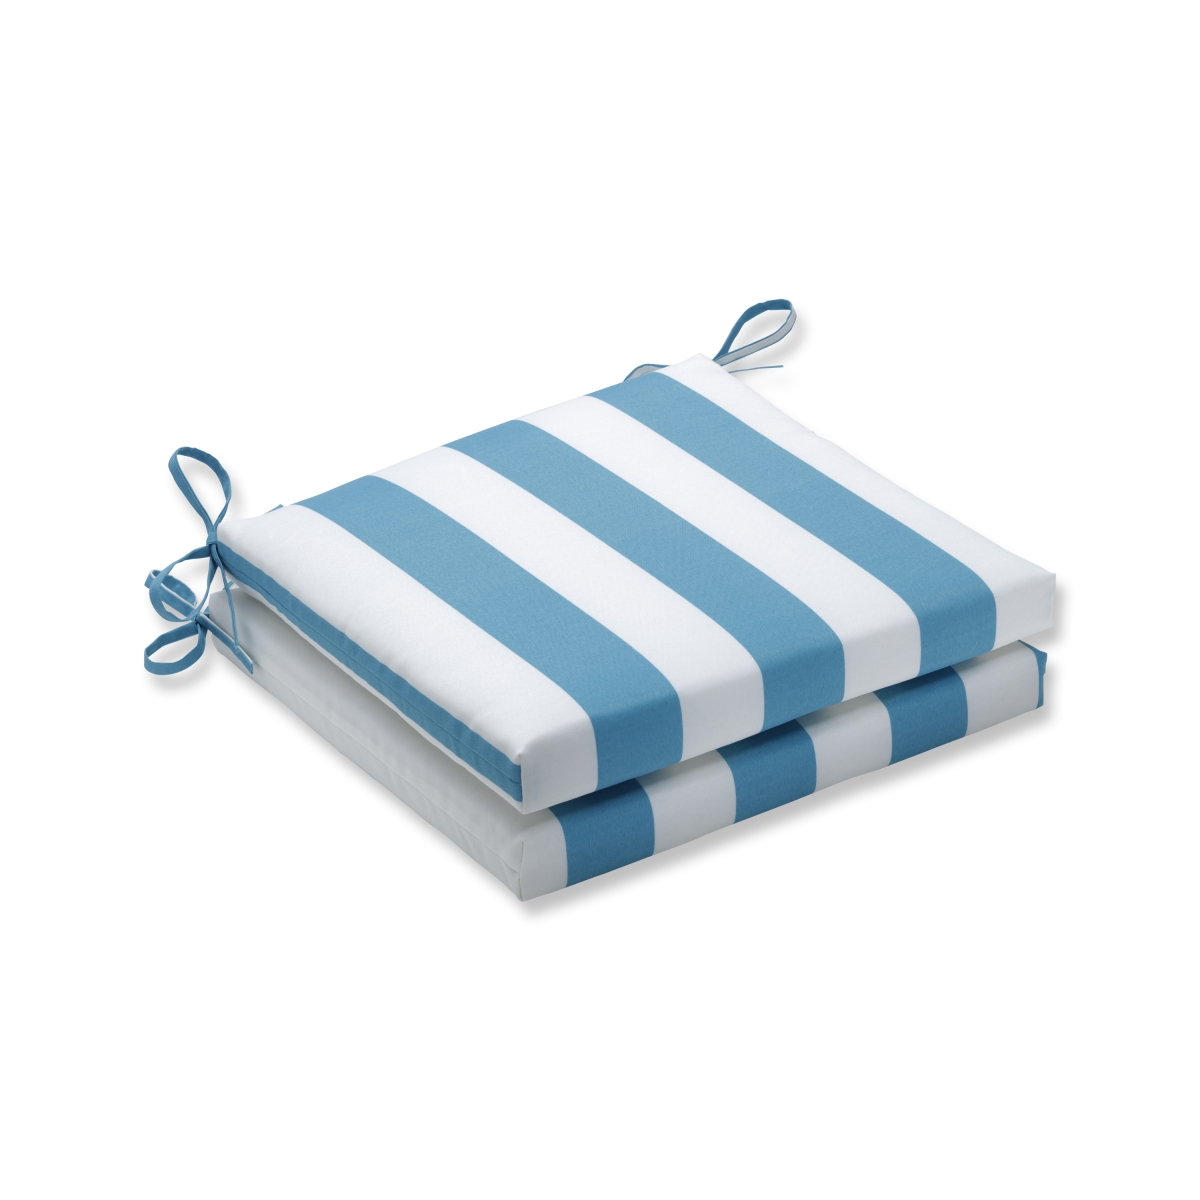 20 X 20 X 3 In. Outdoor & Indoor Cabana Stripe Turquoise Squared Corners Seat Cushion, Blue - Set Of 2